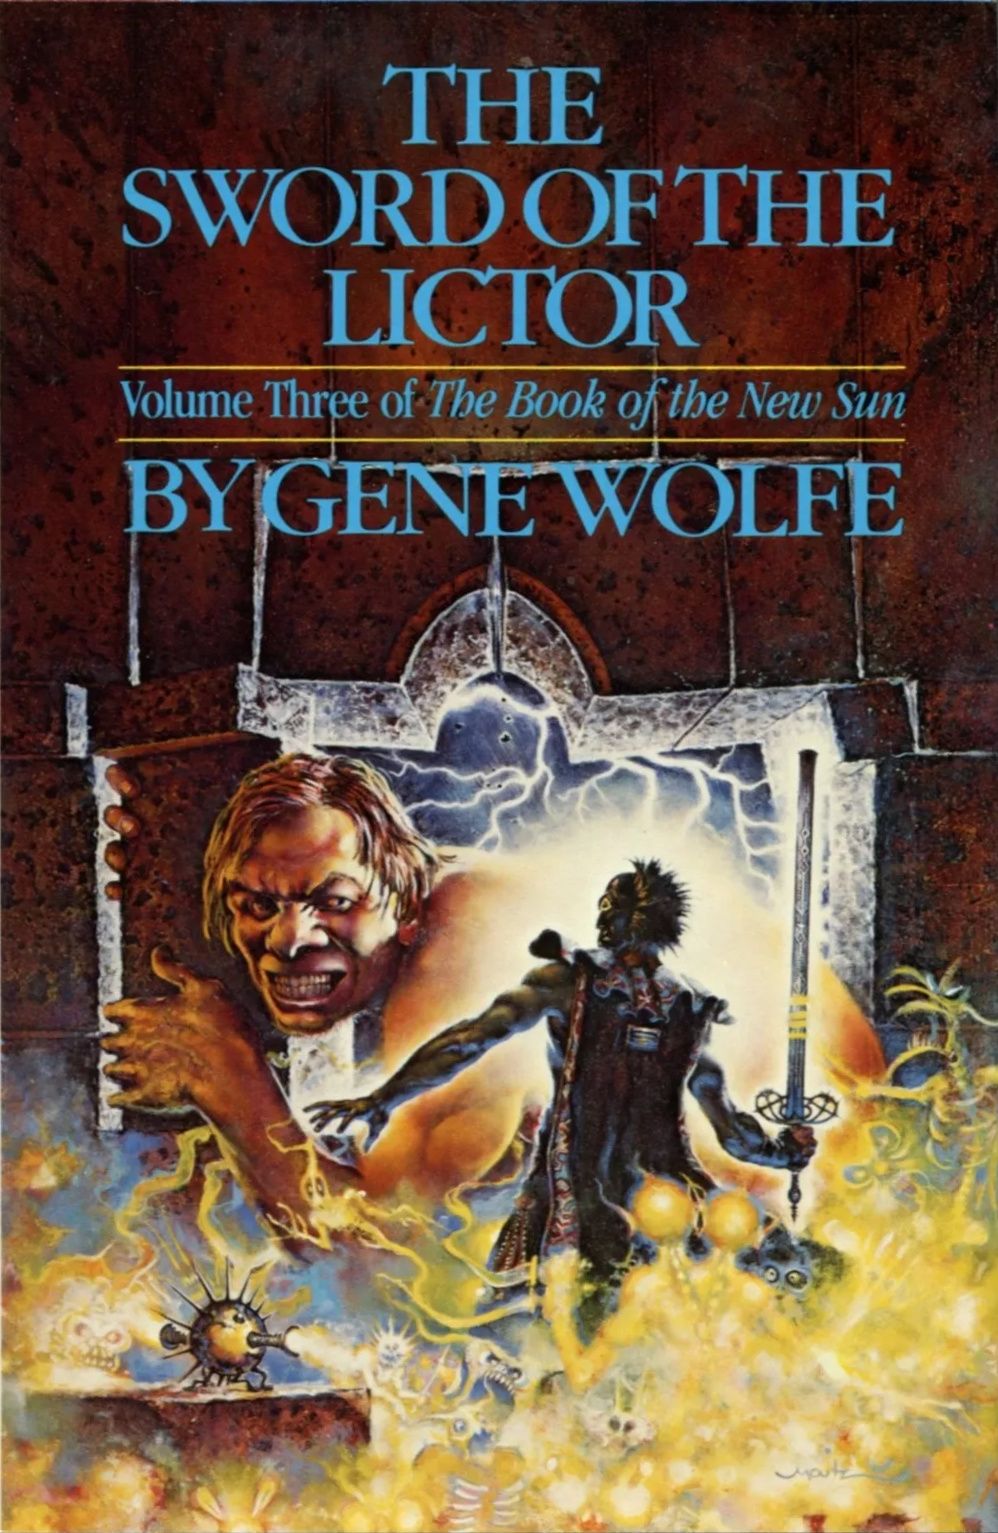 Gene Wolfe: The Sword of the Lictor (Hardcover, 1982, Timescape Books)